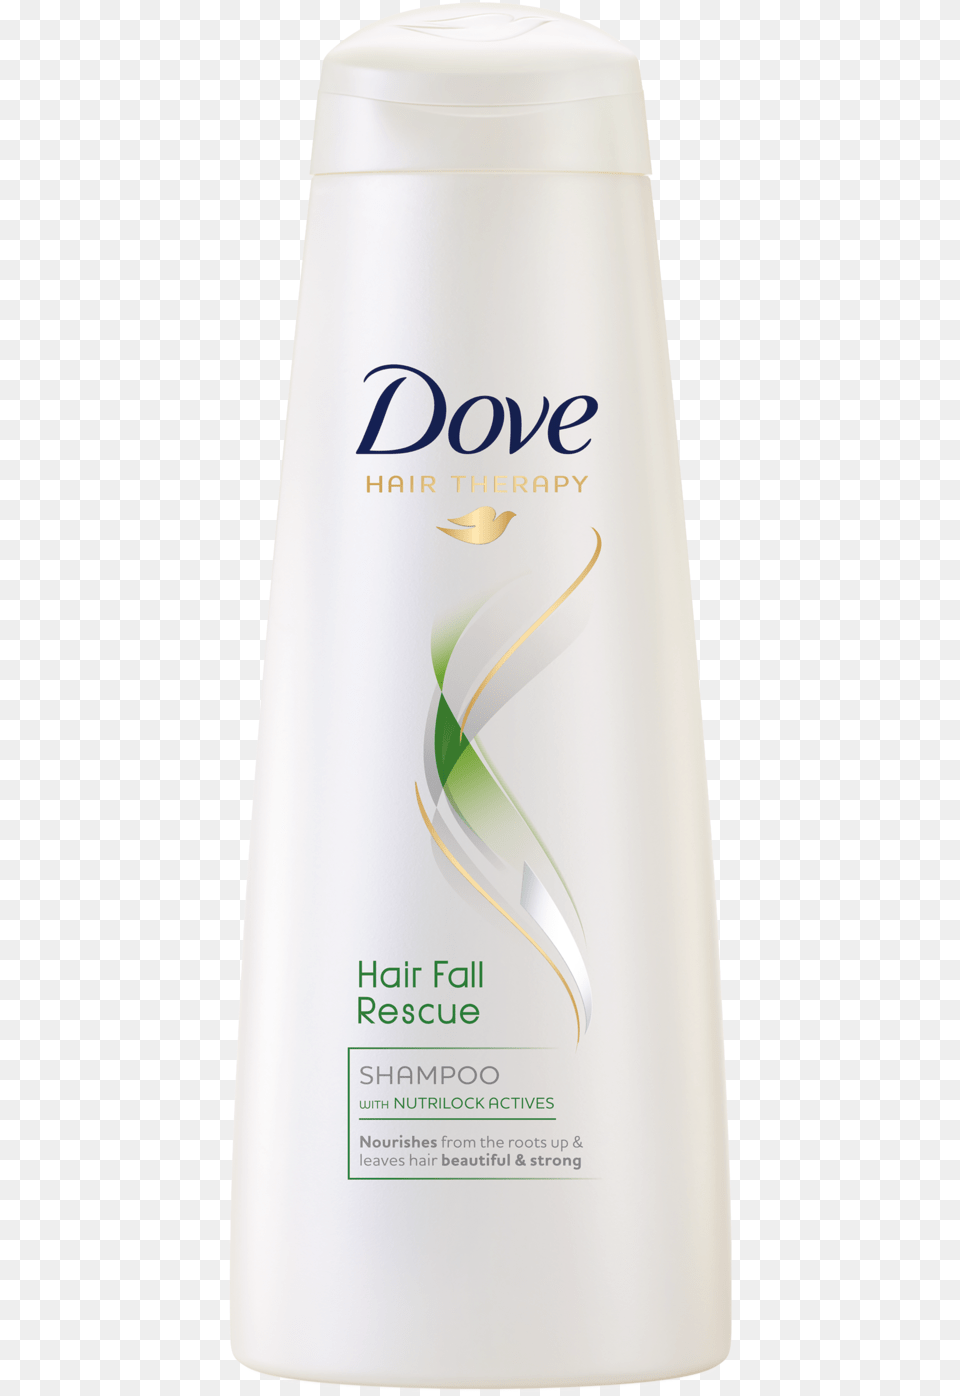 Dove Shampoo Hair Fall Rescue, Bottle, Shaker Png